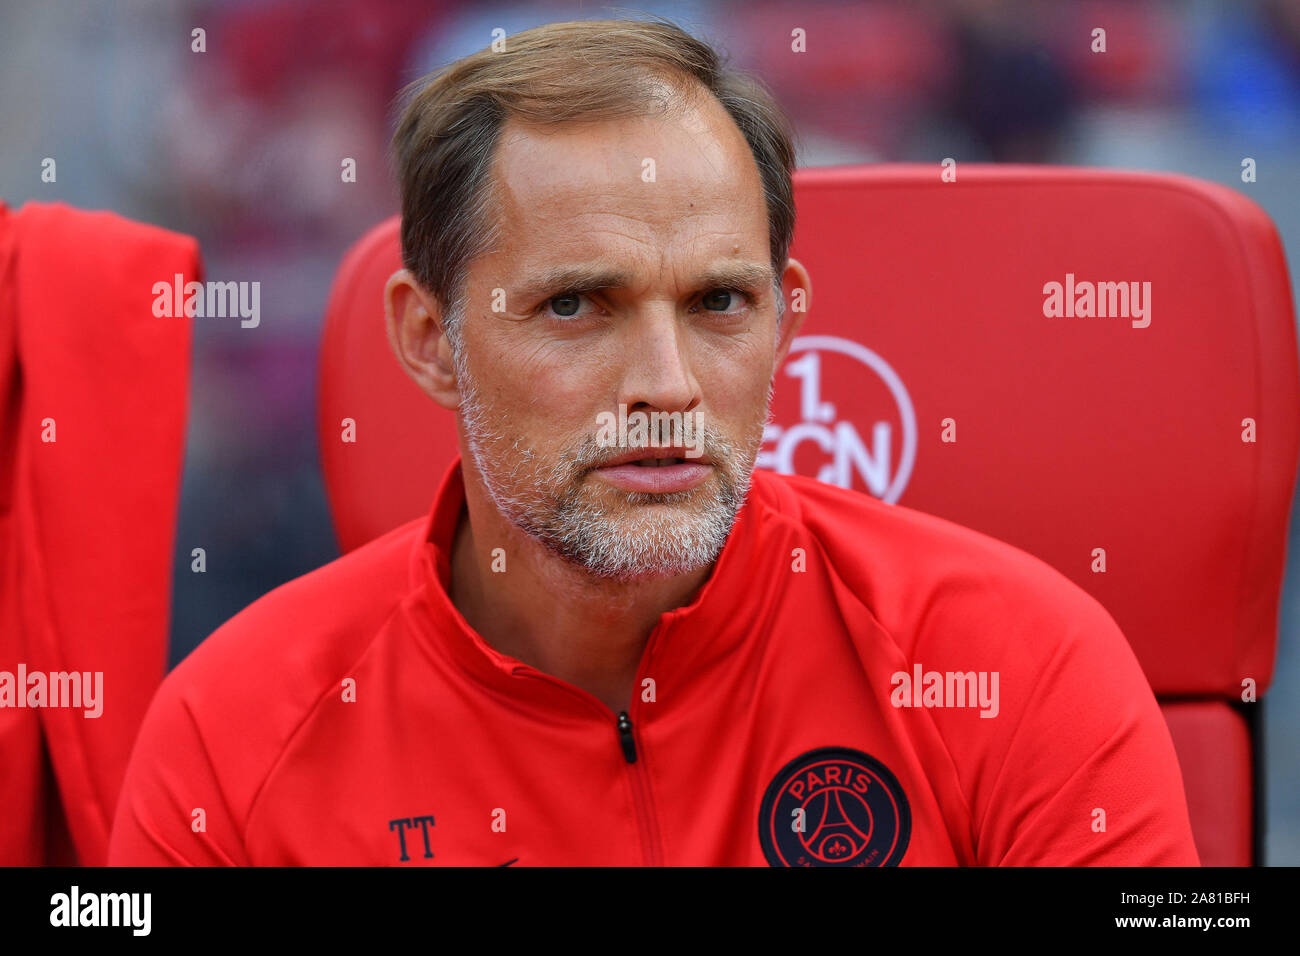 Nuremberg, Deutschland. 06th Nov, 2019. Thomas Tuchel apparently desired candidate for Kovac nachfolge. Archive photo: Thomas TUCHEL (coach PSG), single image, single cut motif, portrait, portrait, portrait. 1.FC Nuremberg-Paris Saint Germain (PSG) 1-1, at 20.07.2019 Max Morlock Stadion Nuernberg, friendly match, DFL REGULATIONS PROHIBIT ANY USE OF PHOTOGRAPHS AS IMAGE SEQUENCES AND/OR QUASI-VIDEO. ¬ | usage worldwide Credit: dpa/Alamy Live News Stock Photo